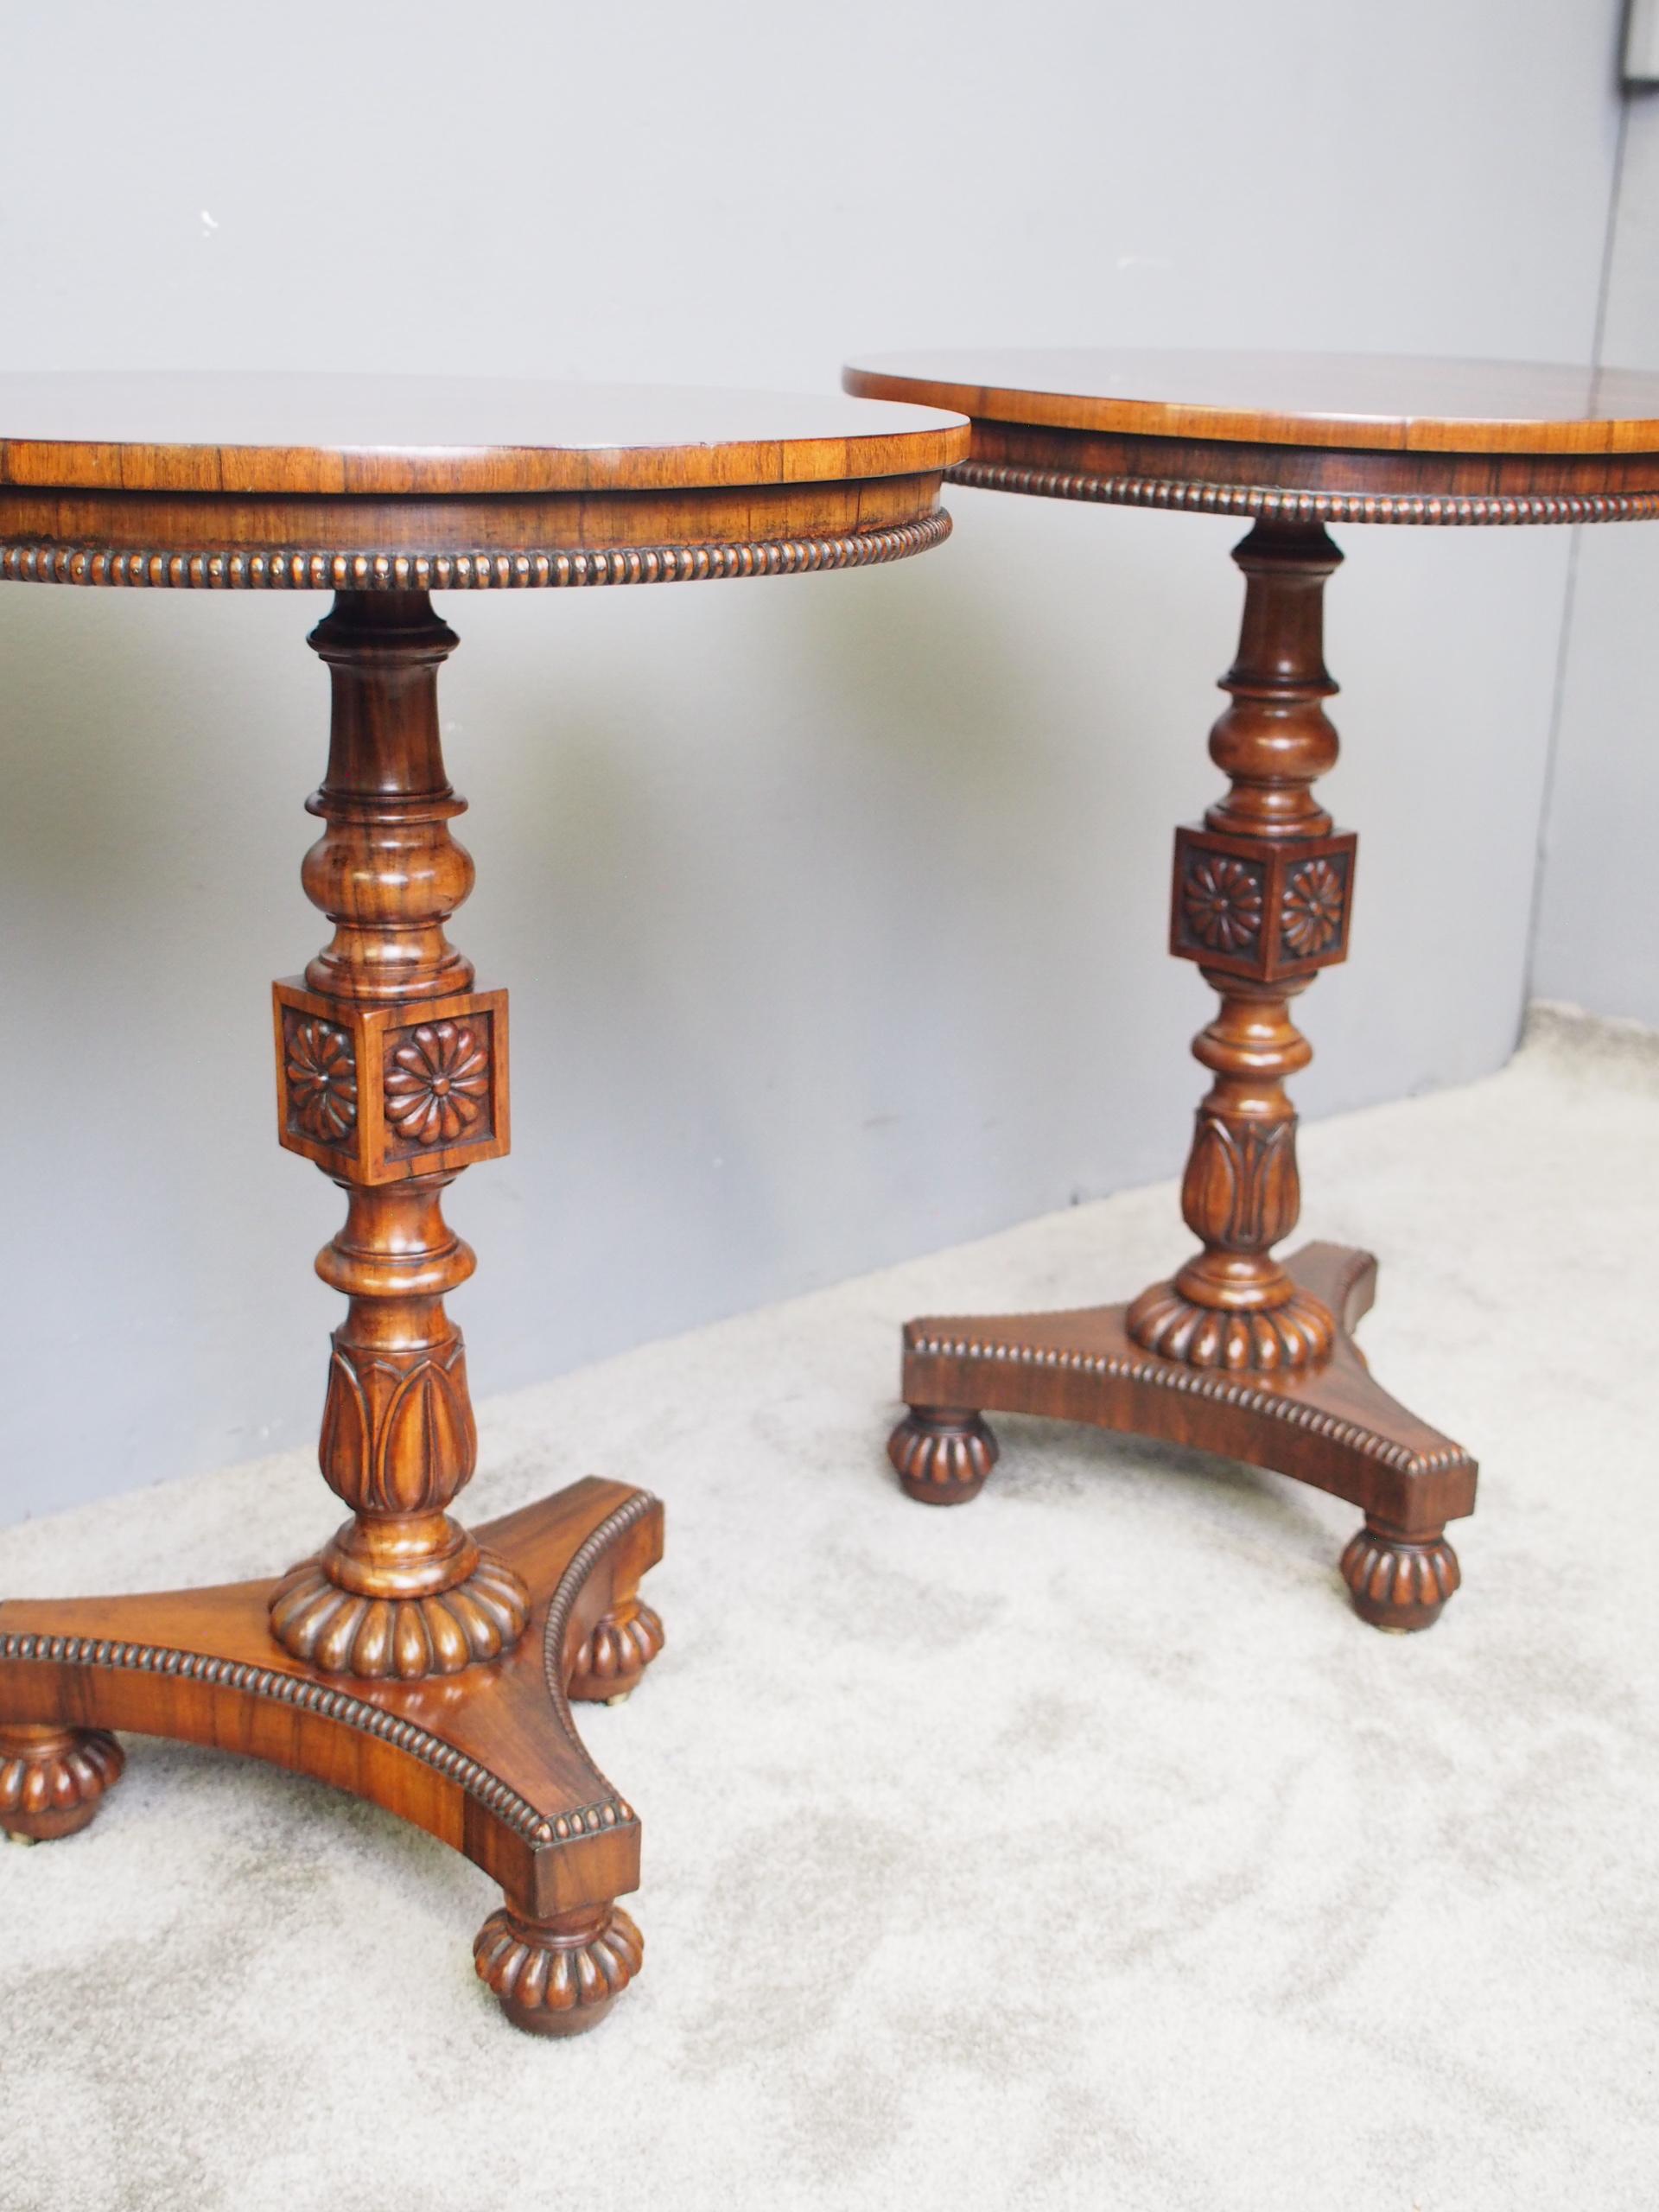 Rare pair of rosewood and Goncalo Alves circular occasional tables, circa 1830. The tops have well figured rosewood veneers, with a simple fore-edge featuring half round beading. This leads on to a pedestal stem with a variety of ring turning and